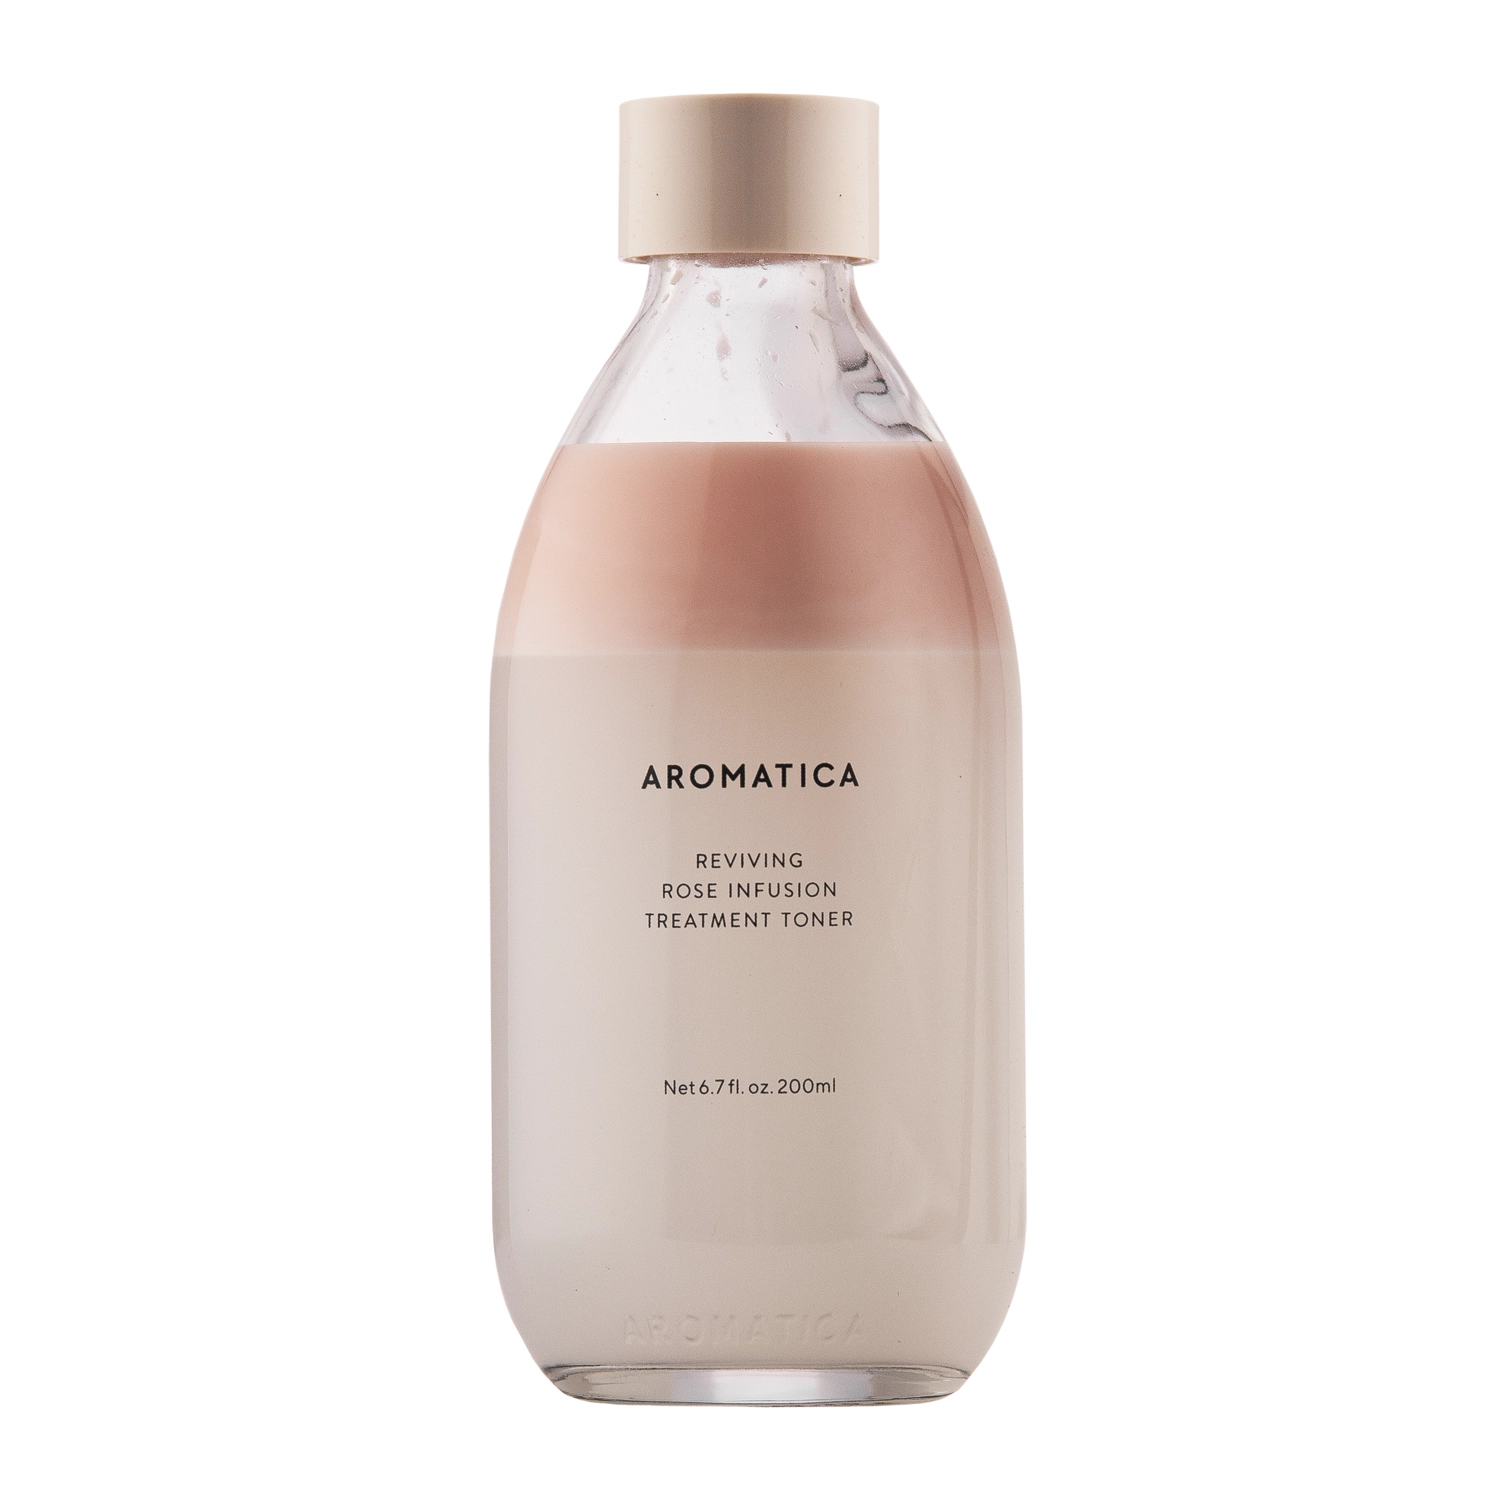 Aromatica - Reviving Rose Infusion Treatment Toner - Soothing Rose Tonic - 200ml